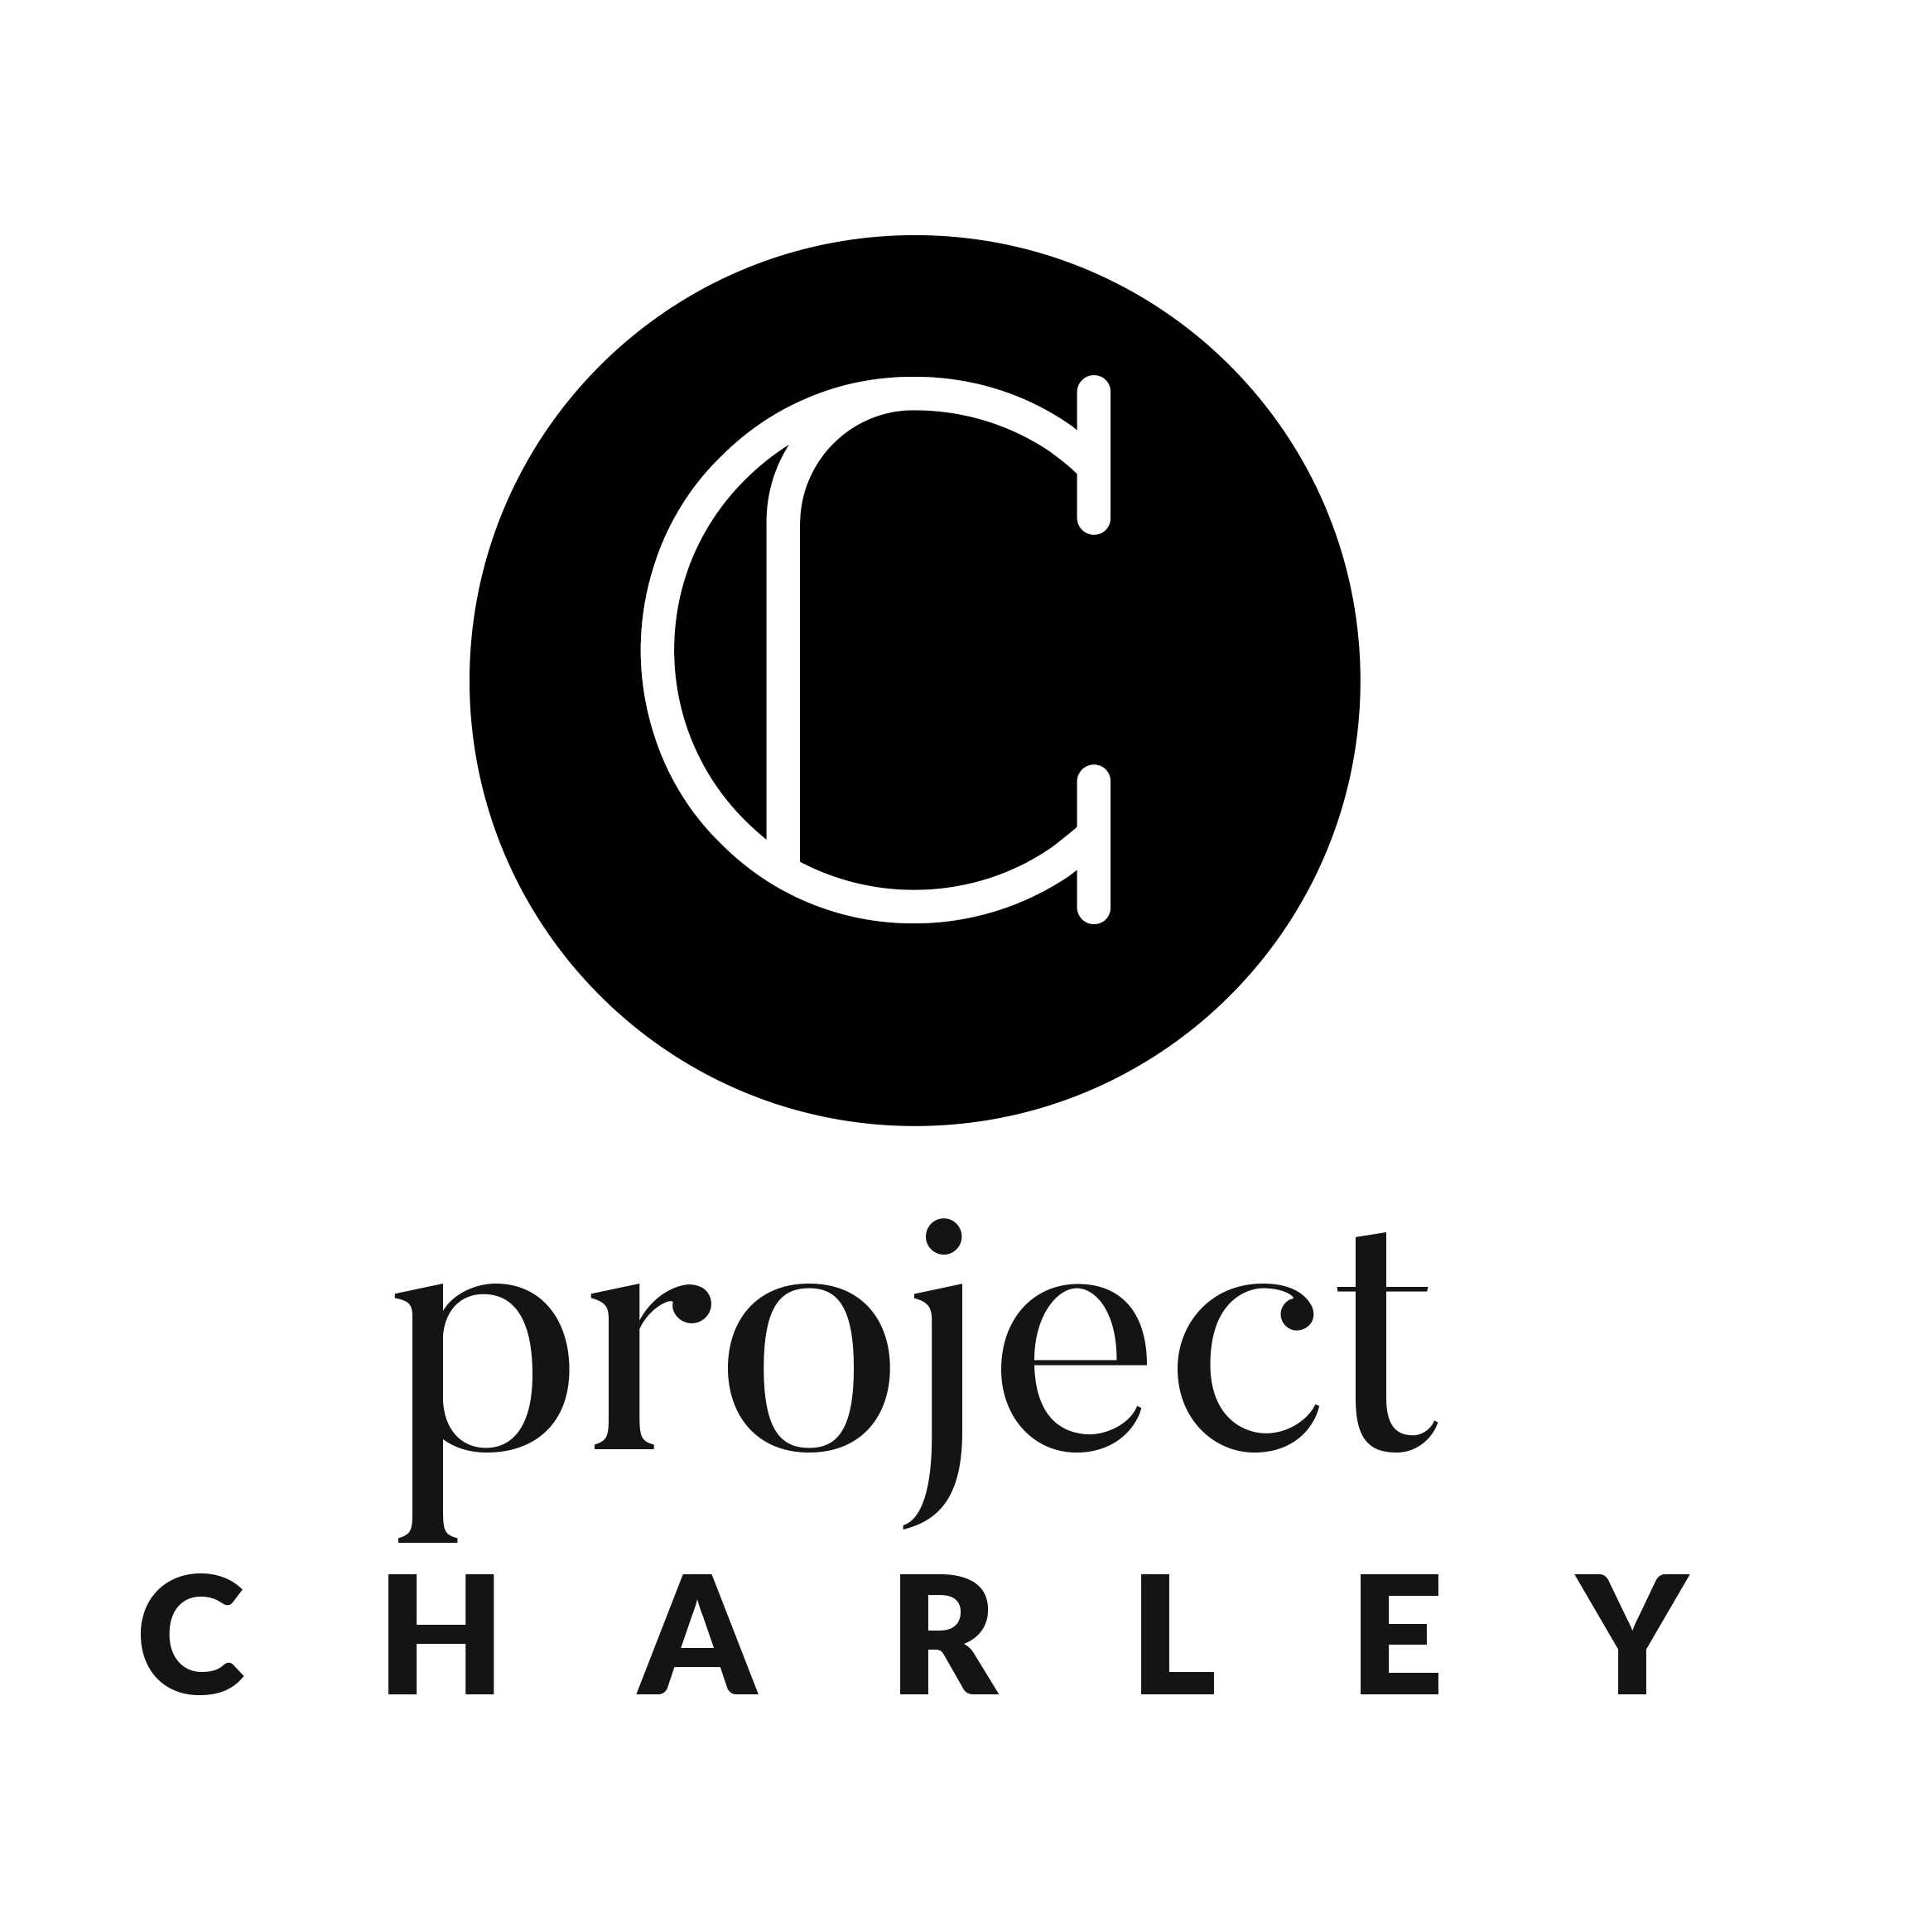 Project Charley